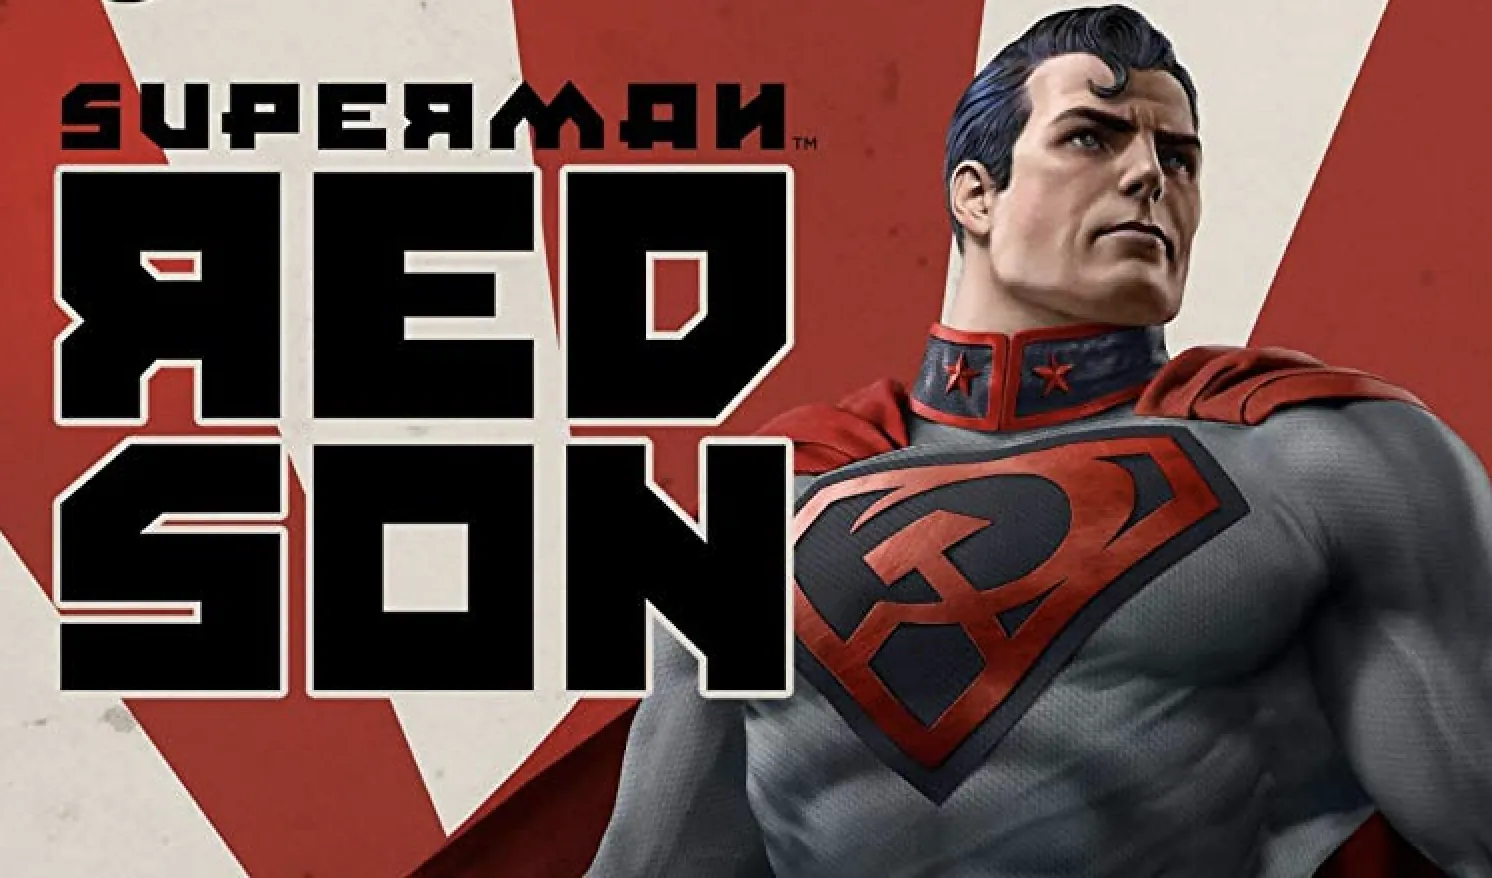 Superman-Red-Son